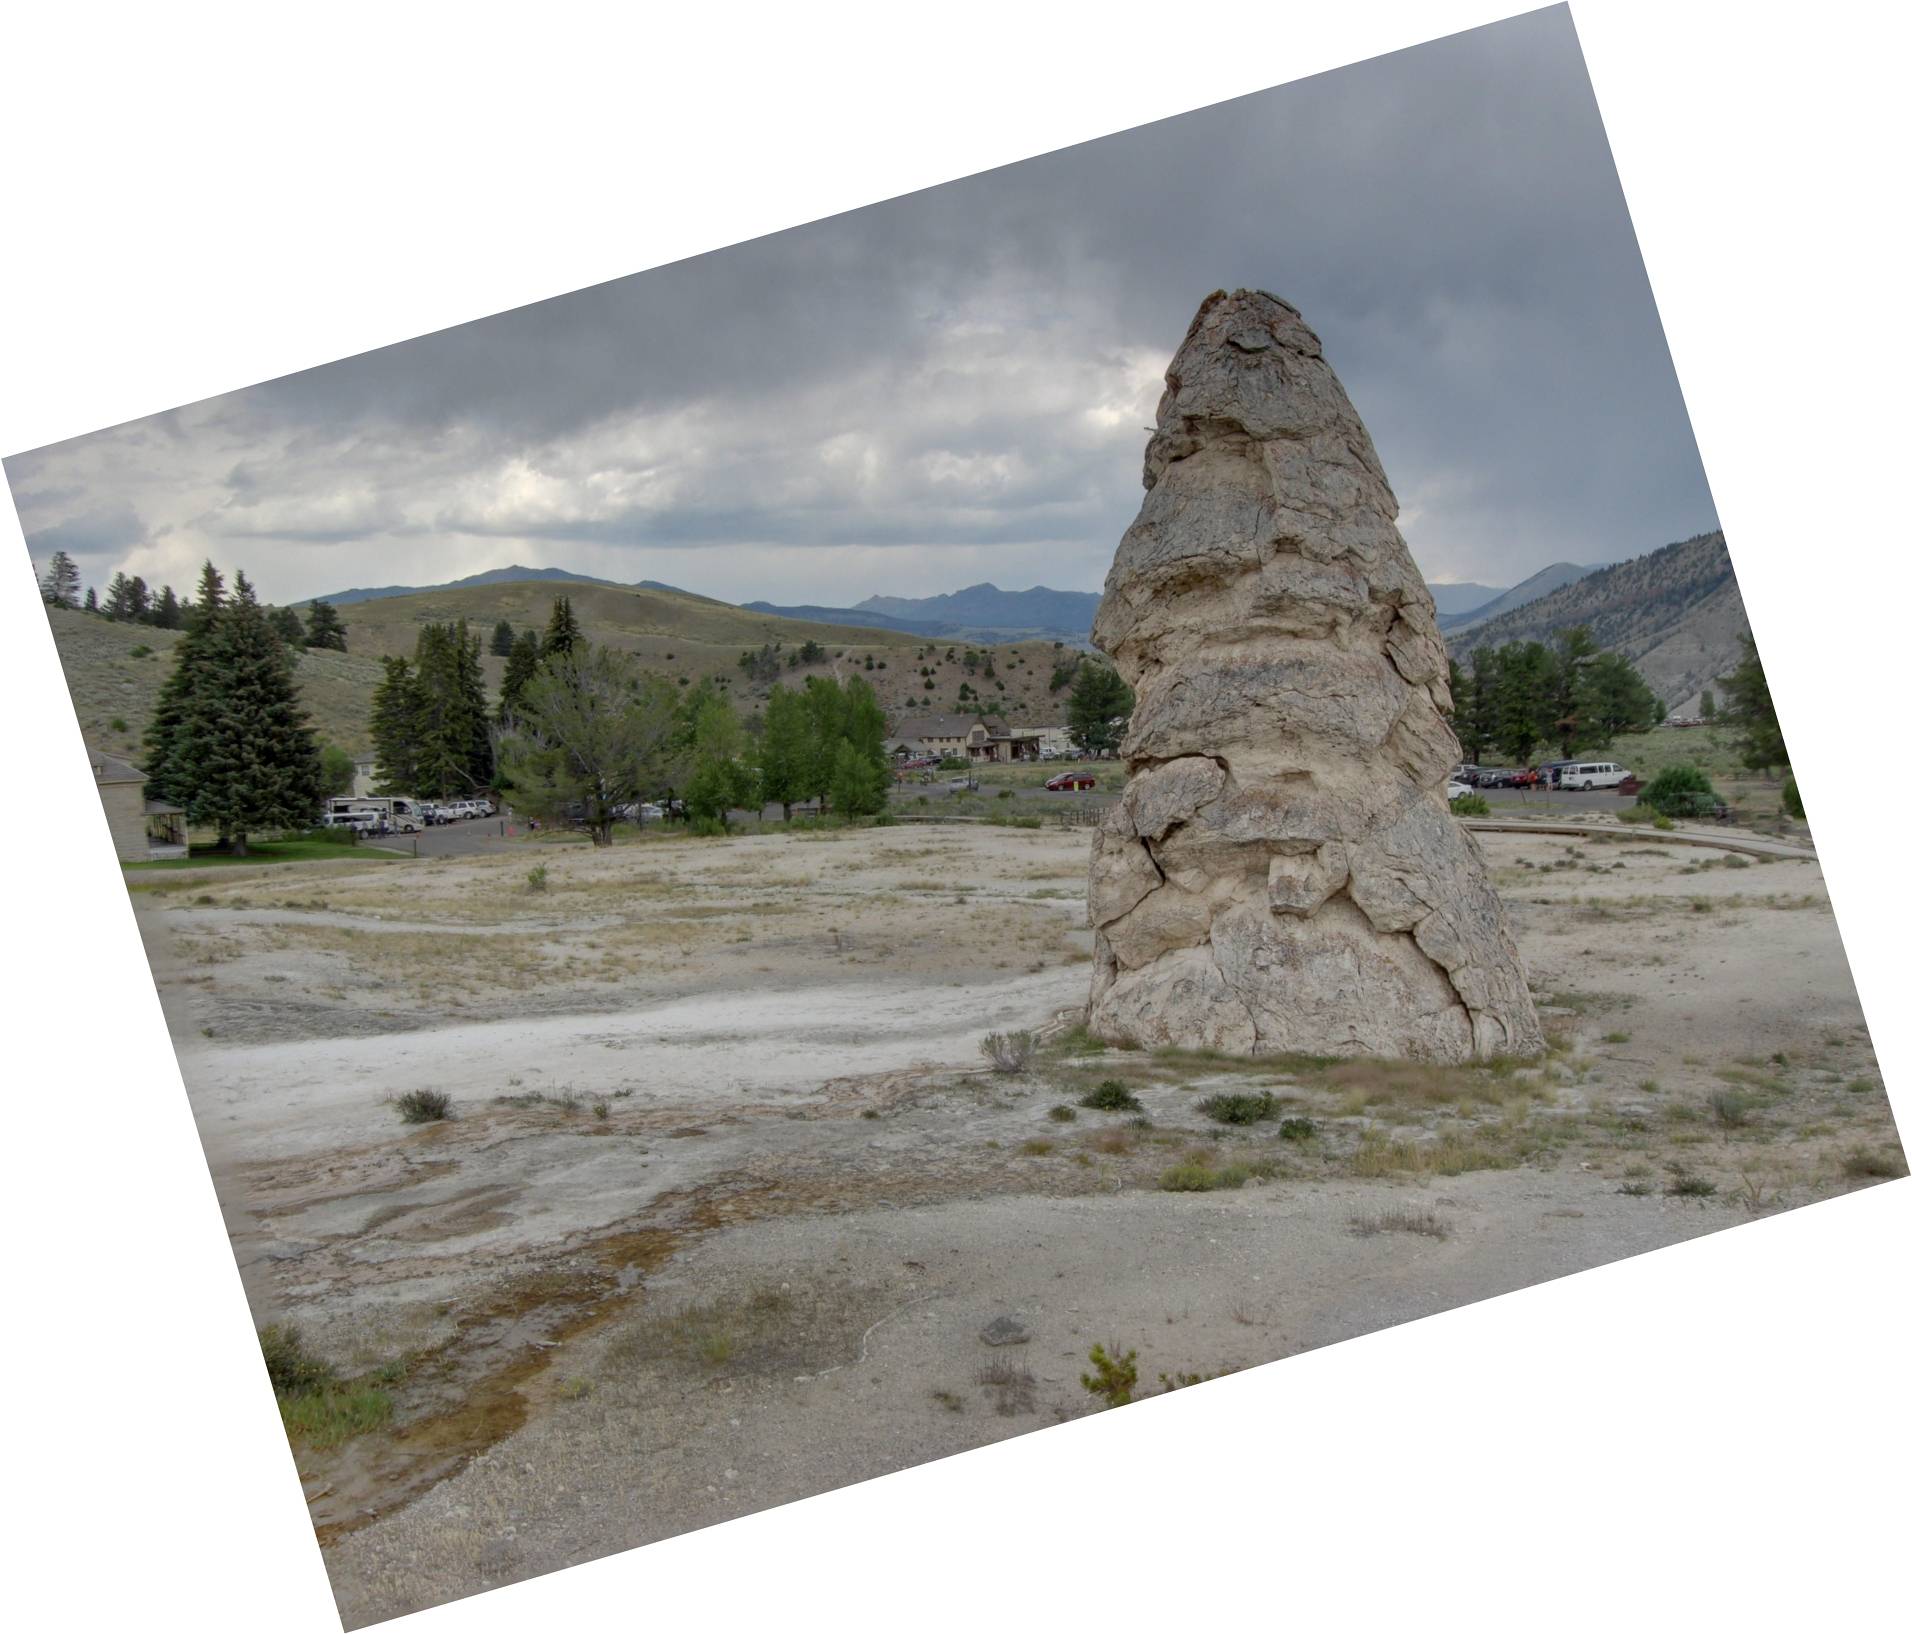 Image: The Liberty Cap hot spring cone